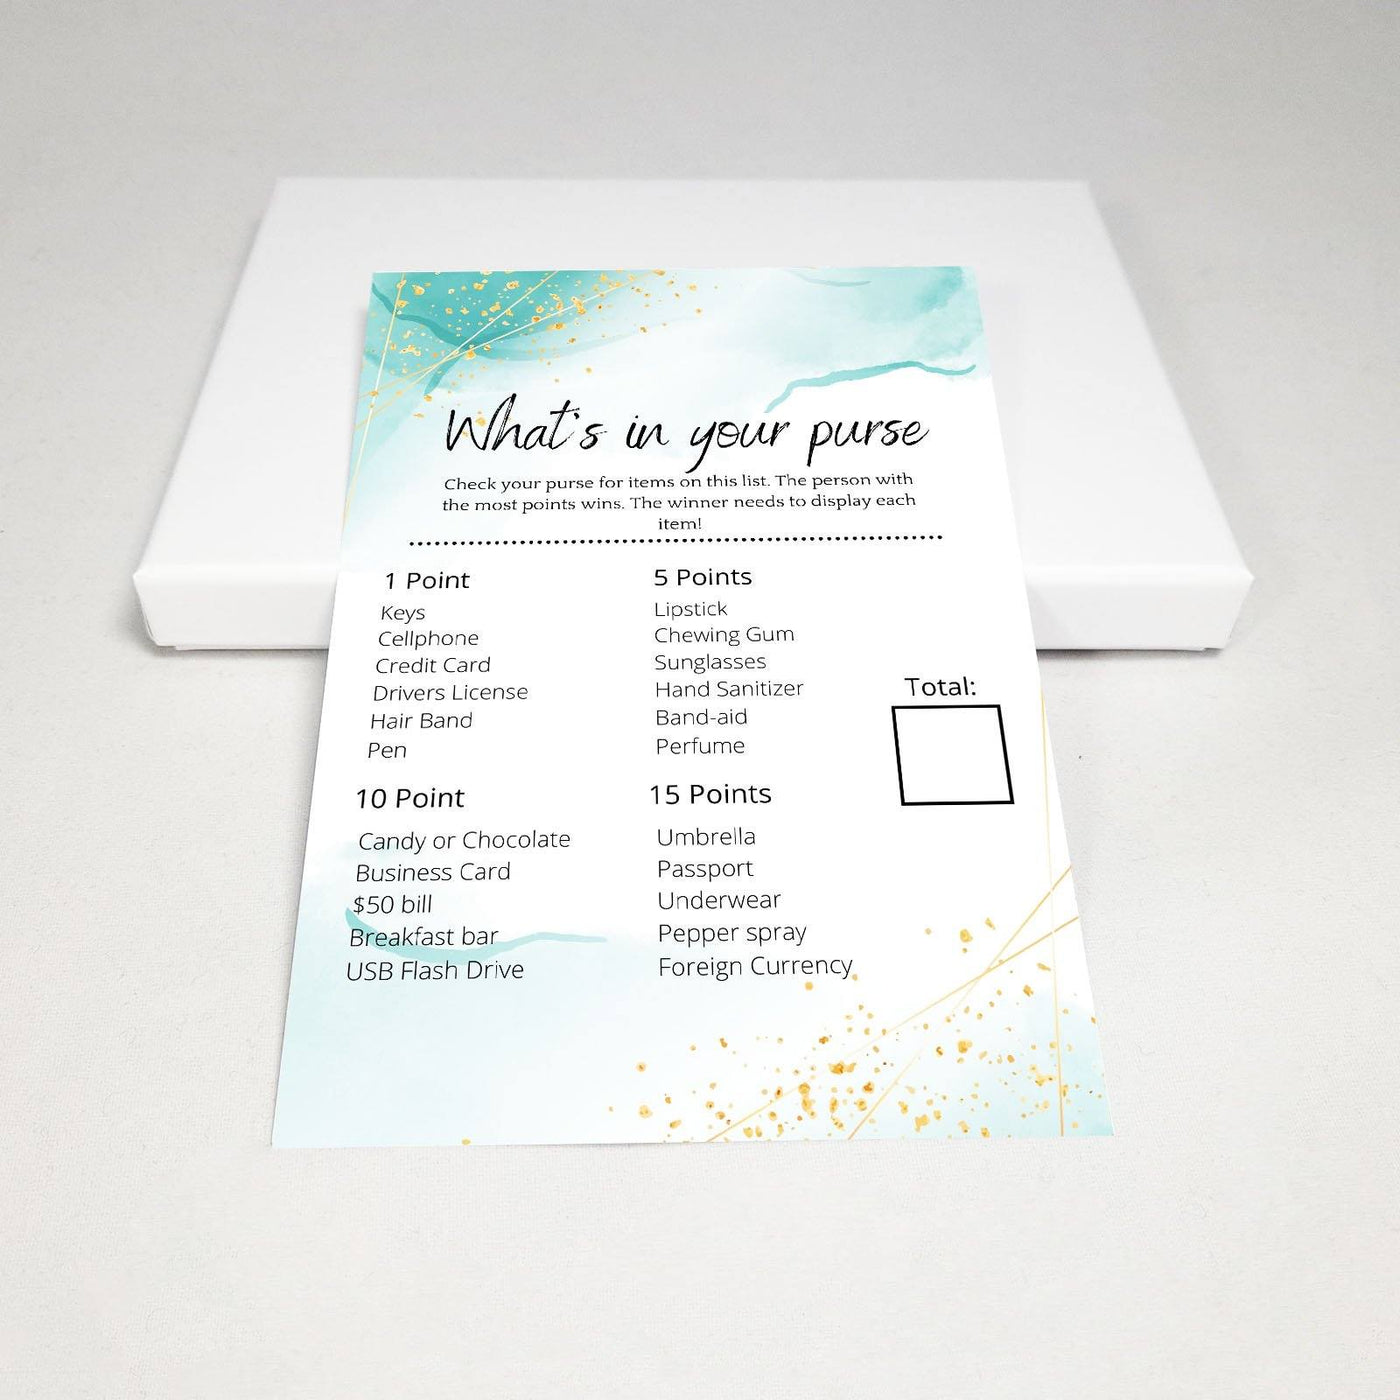 Ocean Gold - Whats In Your Purse? | Bridal Shower Game Party Games Your Party Games 